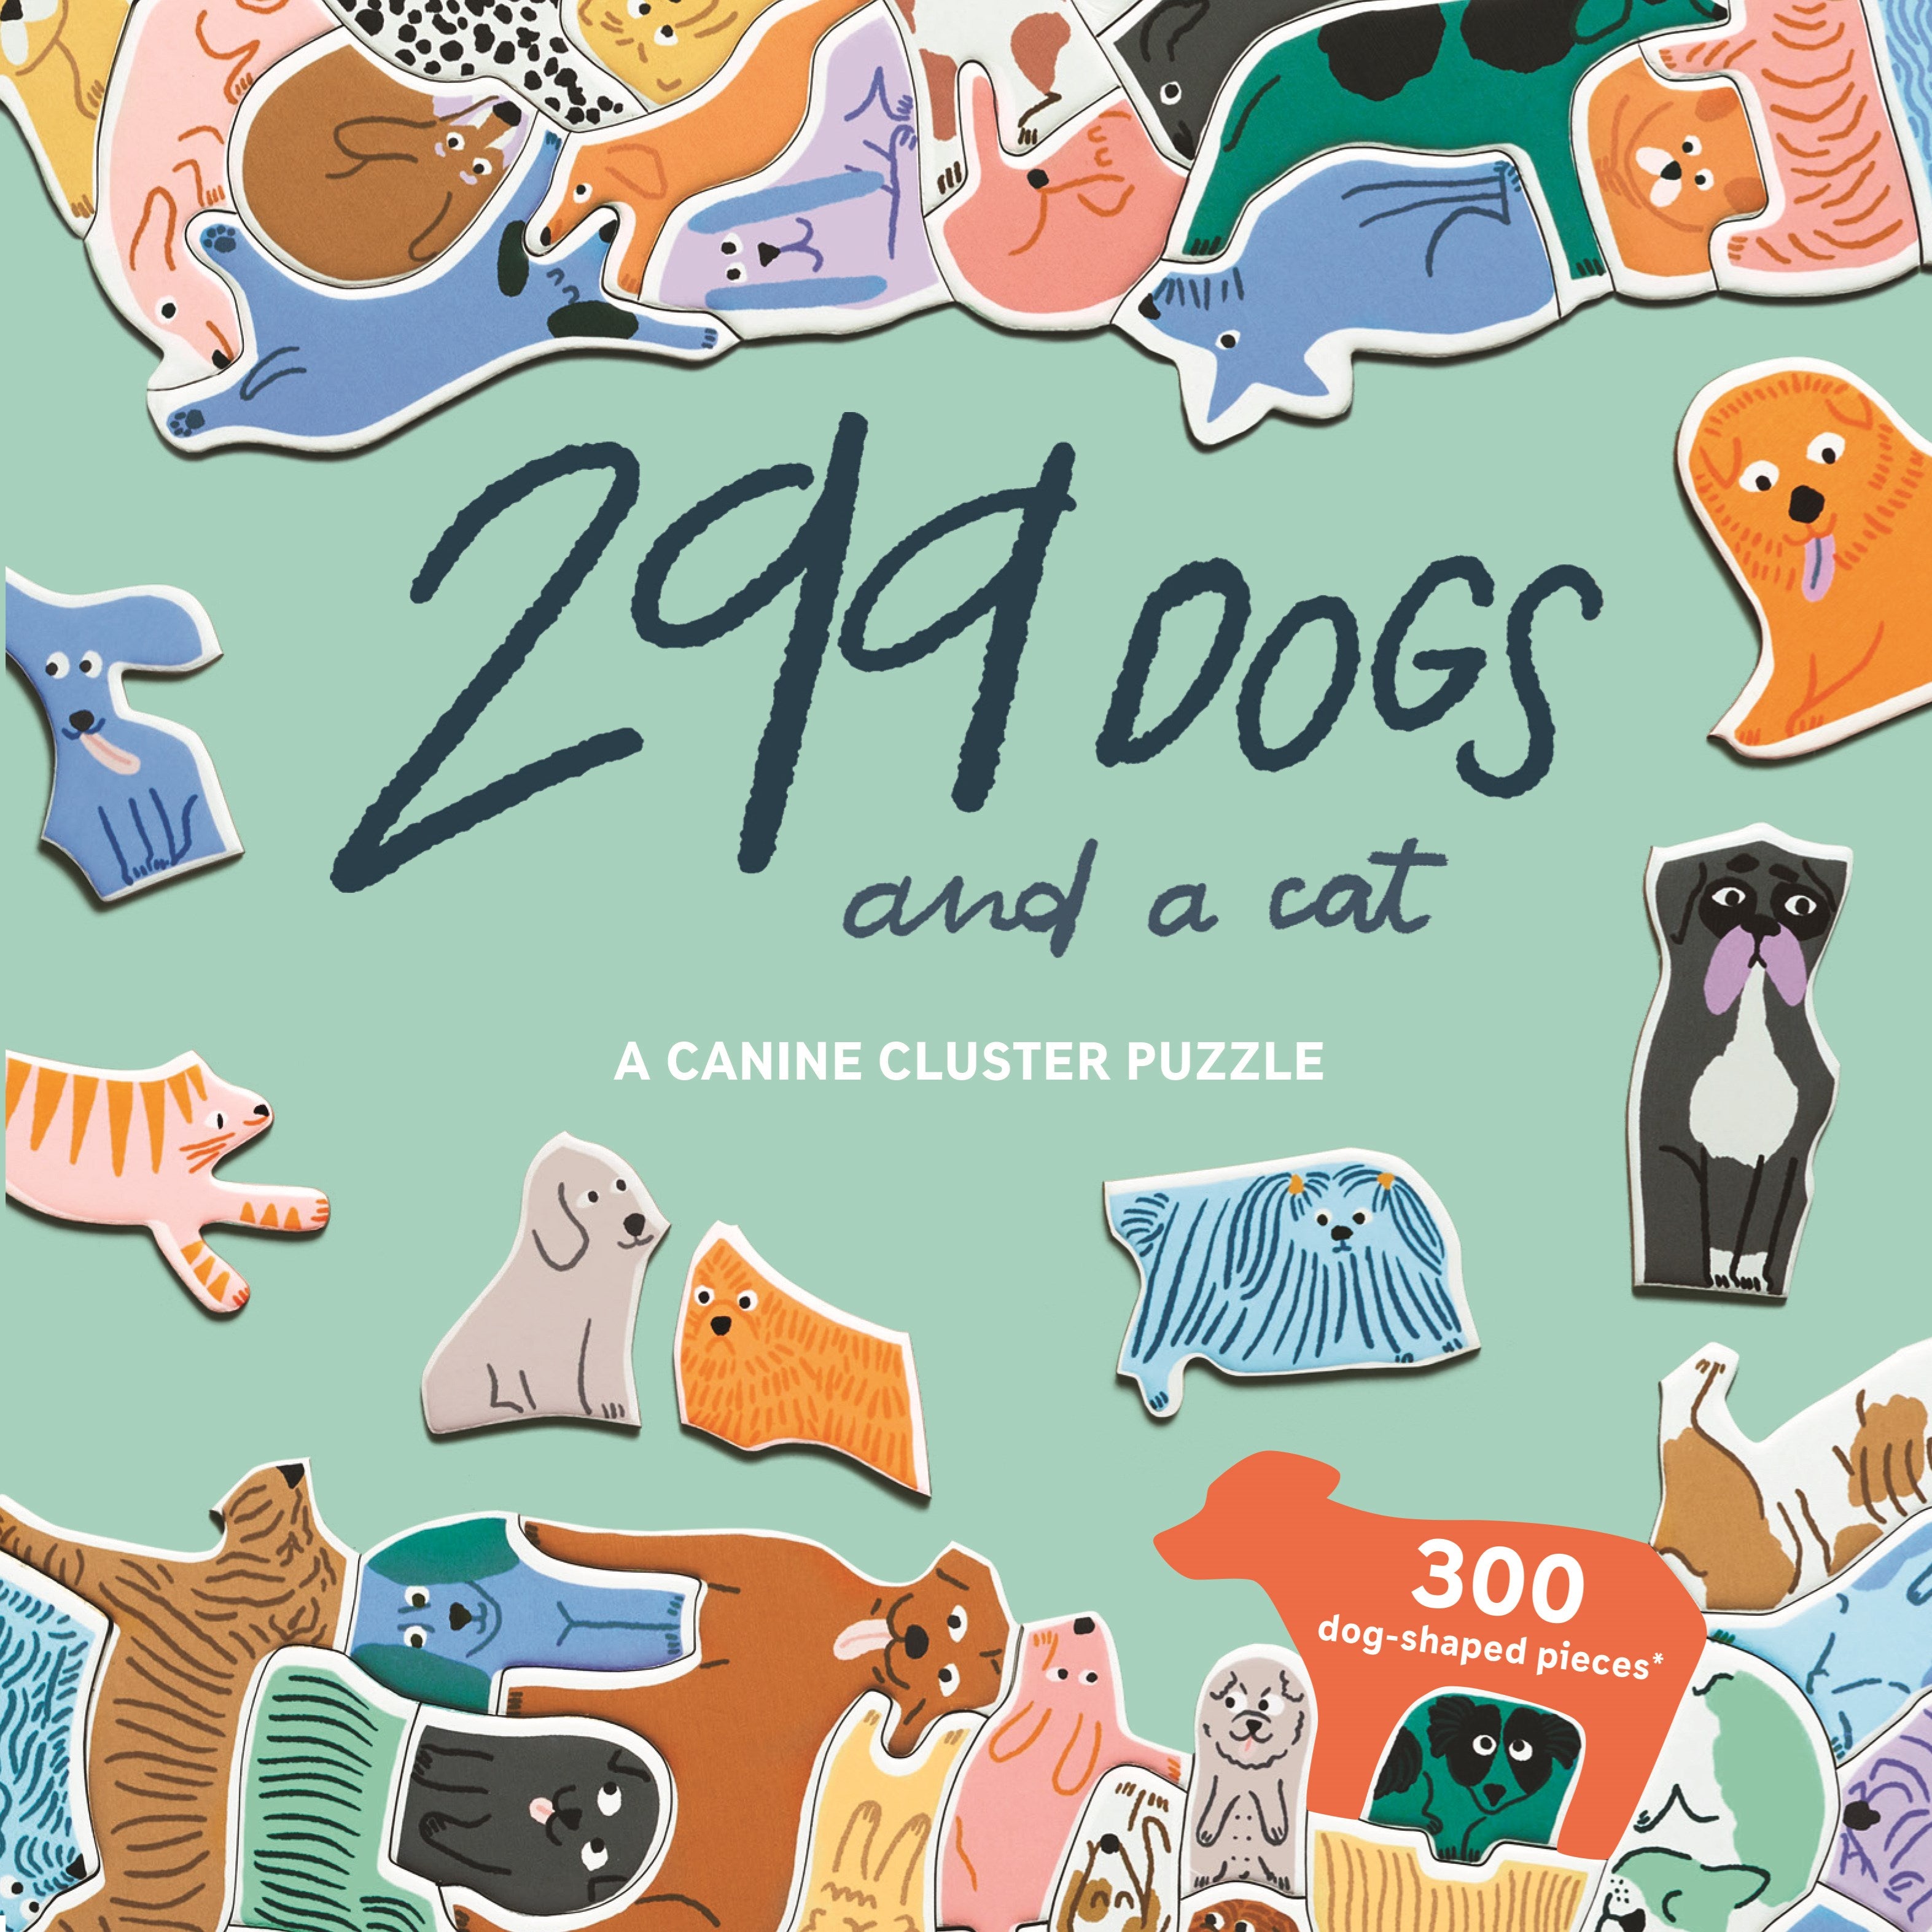 299 Dogs (and a cat) 300 Piece Puzzle: A Canine Cluster Puzzle